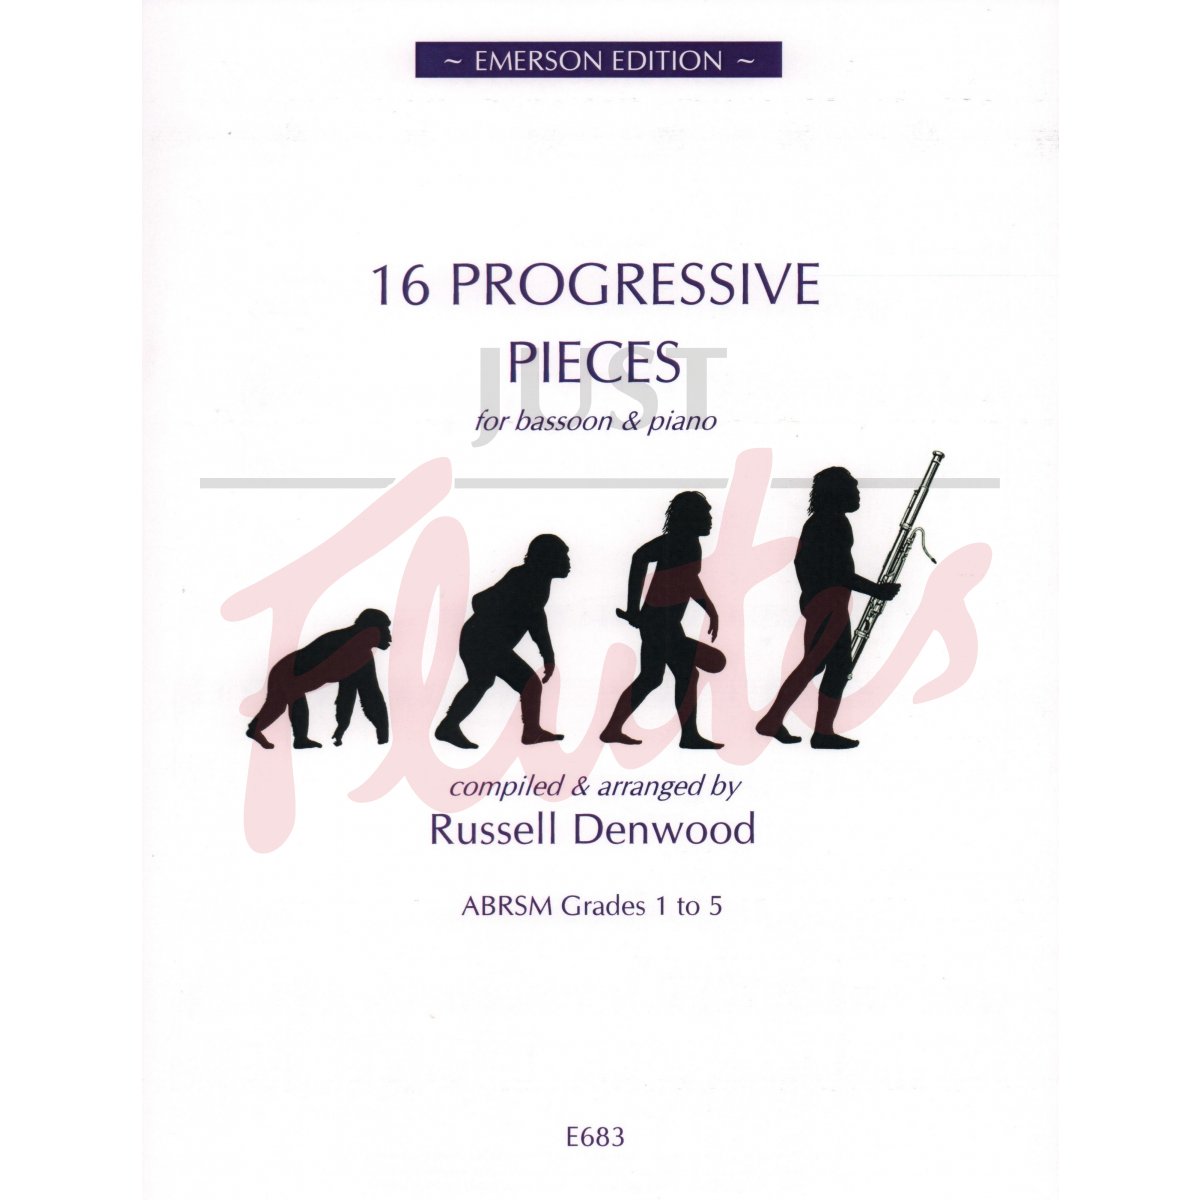 16 Progressive Pieces for Bassoon and Piano